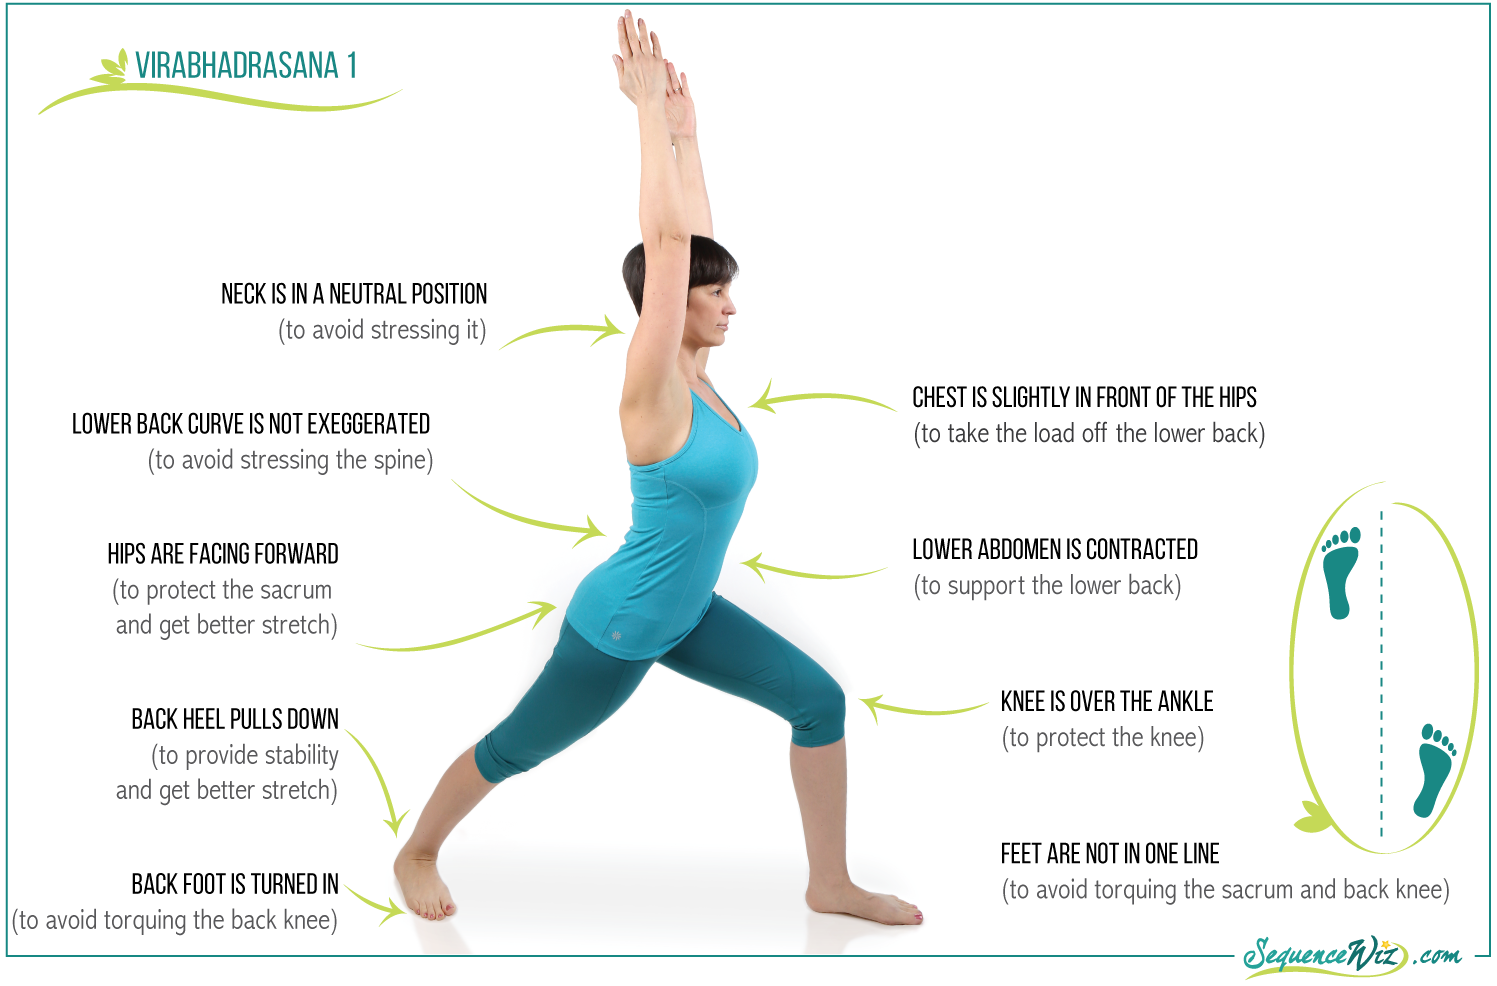 When we bend back, the most important thing is to create an abdominal contr...